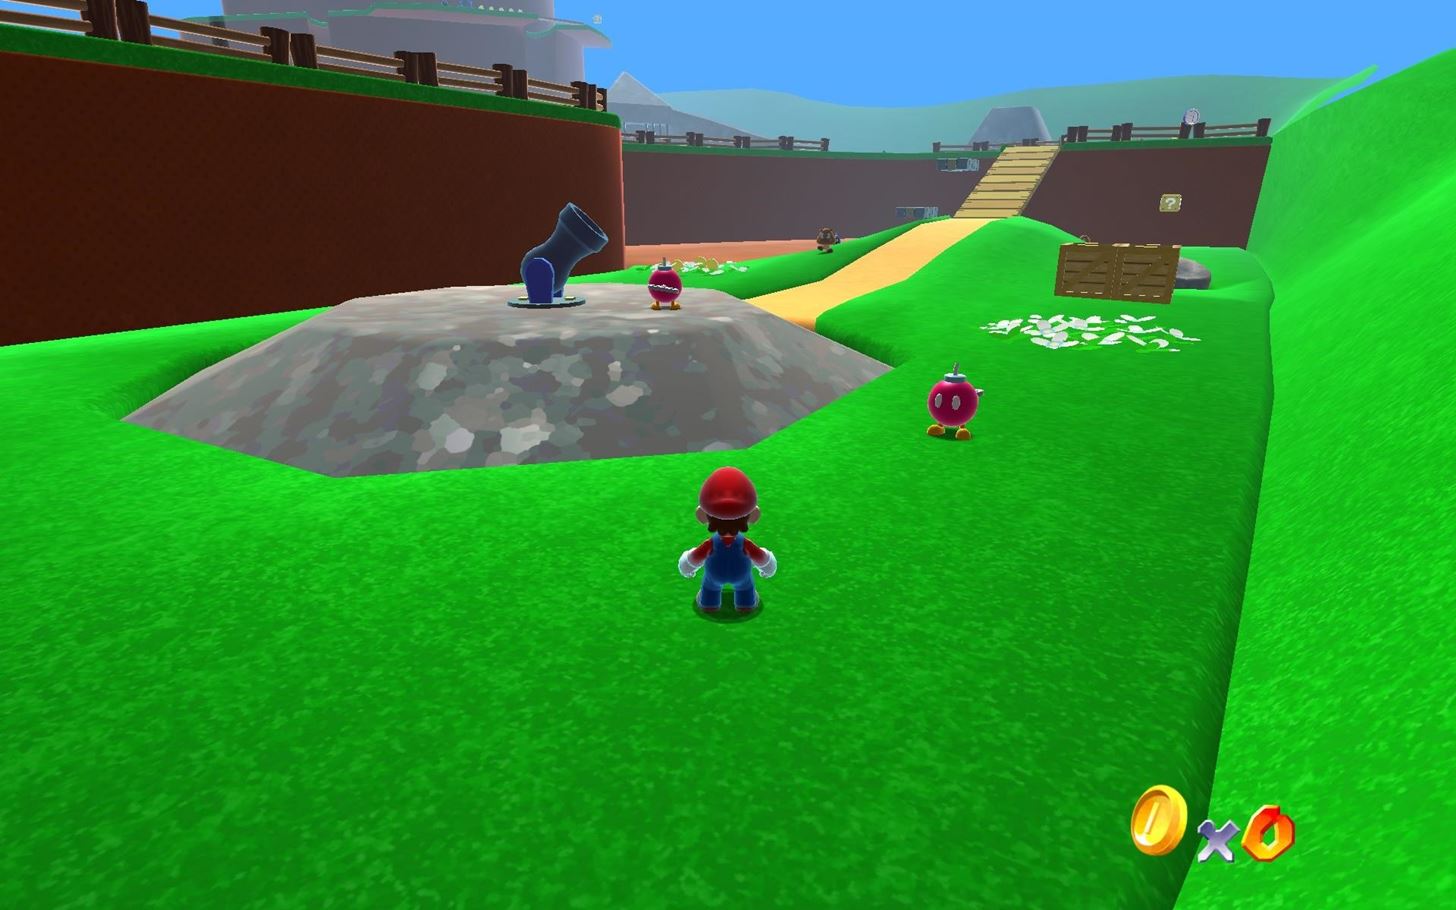 How to Play Super Mario 64 on Android (No Emulator Required)